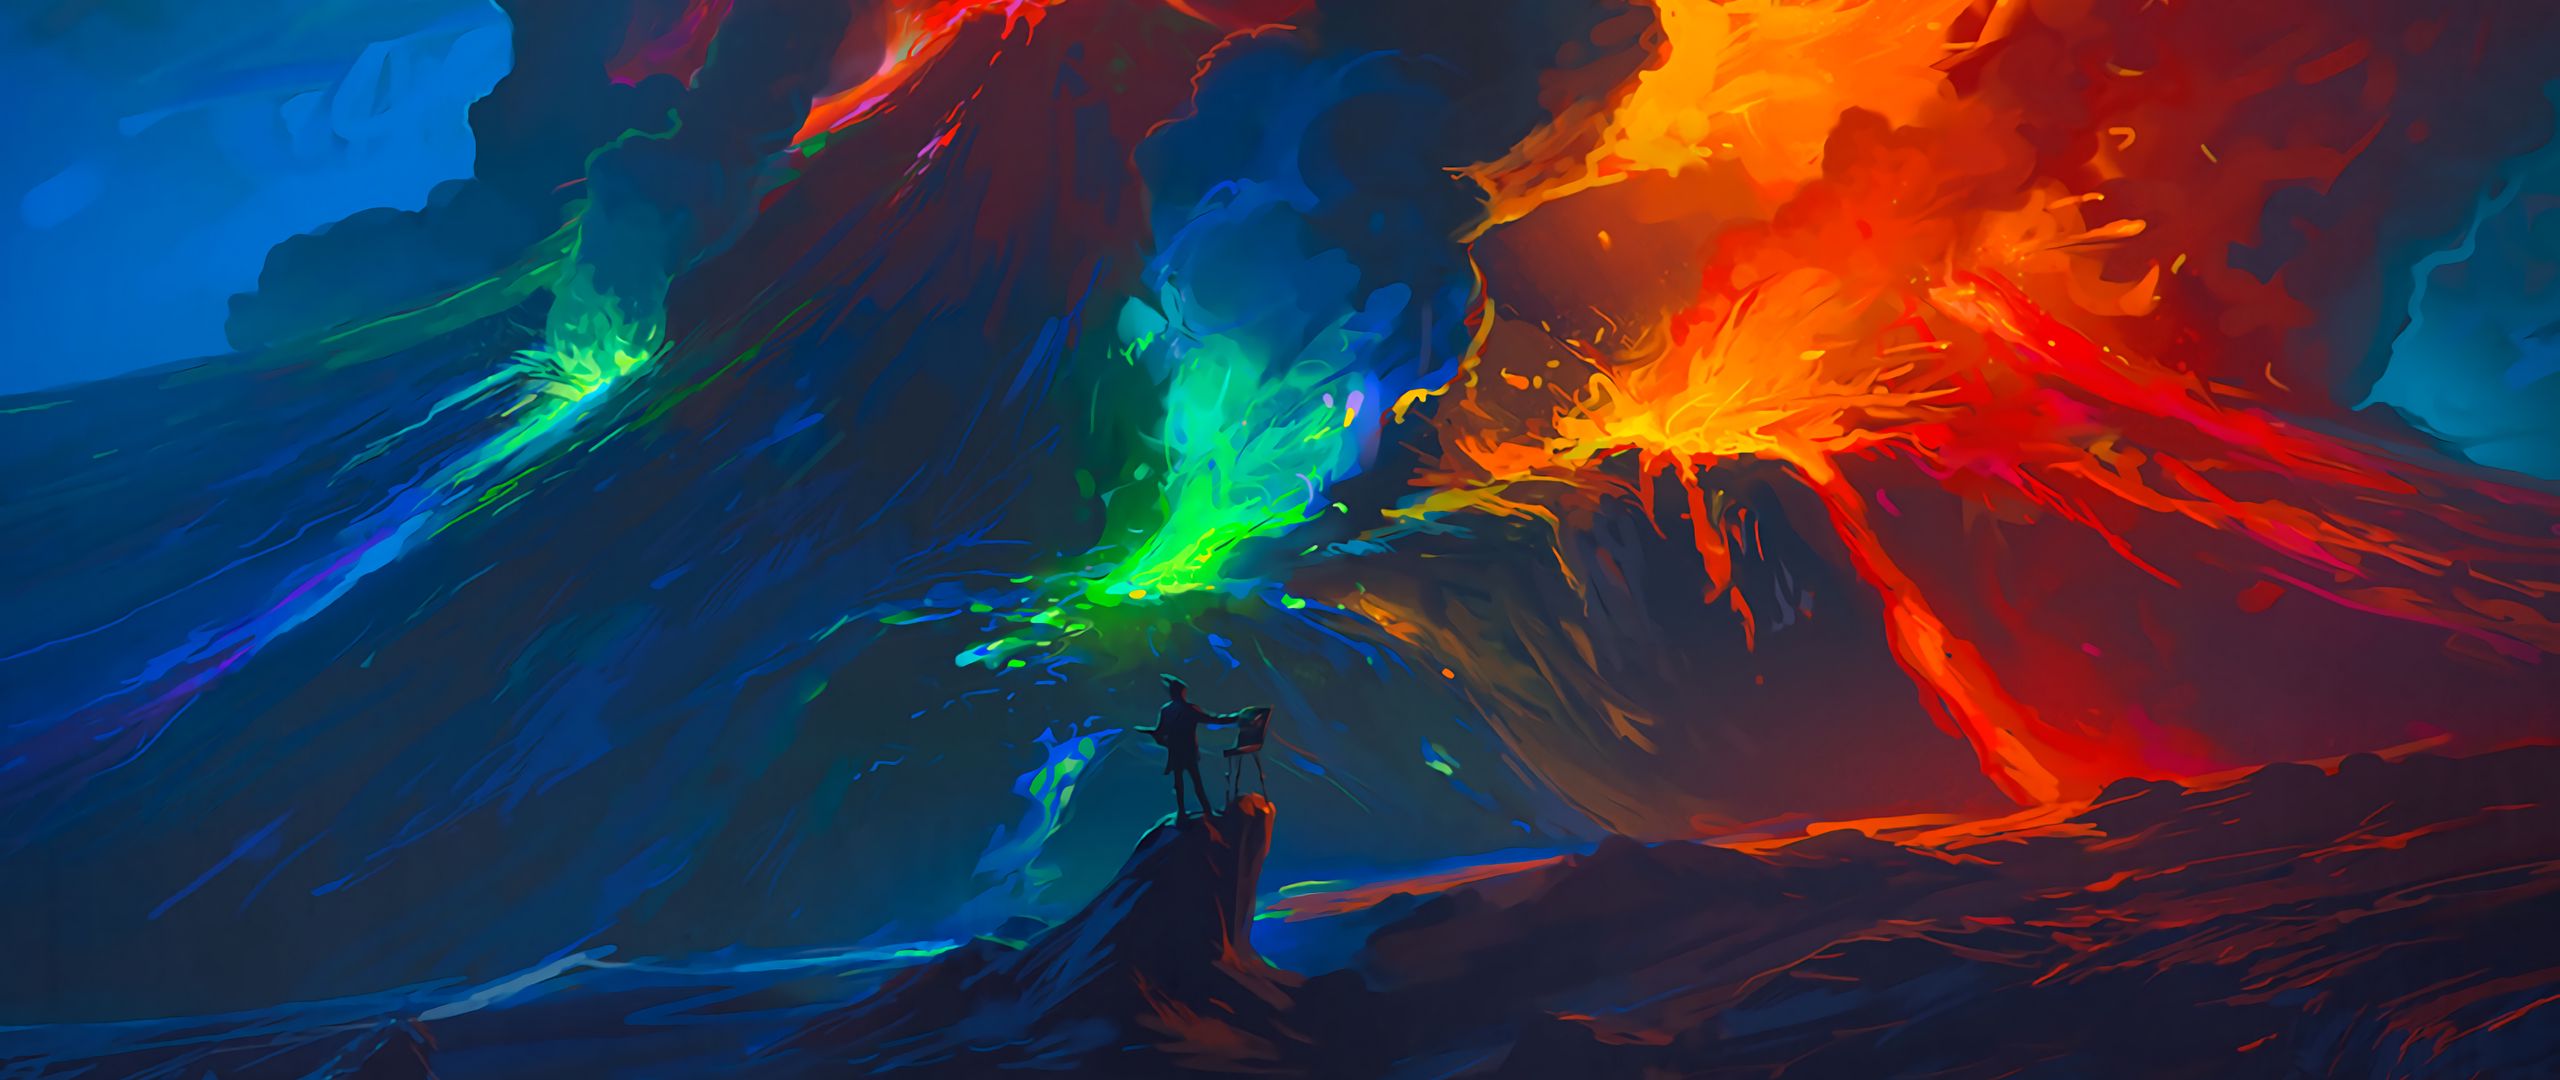 Download wallpaper 2560x1080 artist, waves, colorful, art, fantasy dual wide  1080p hd background